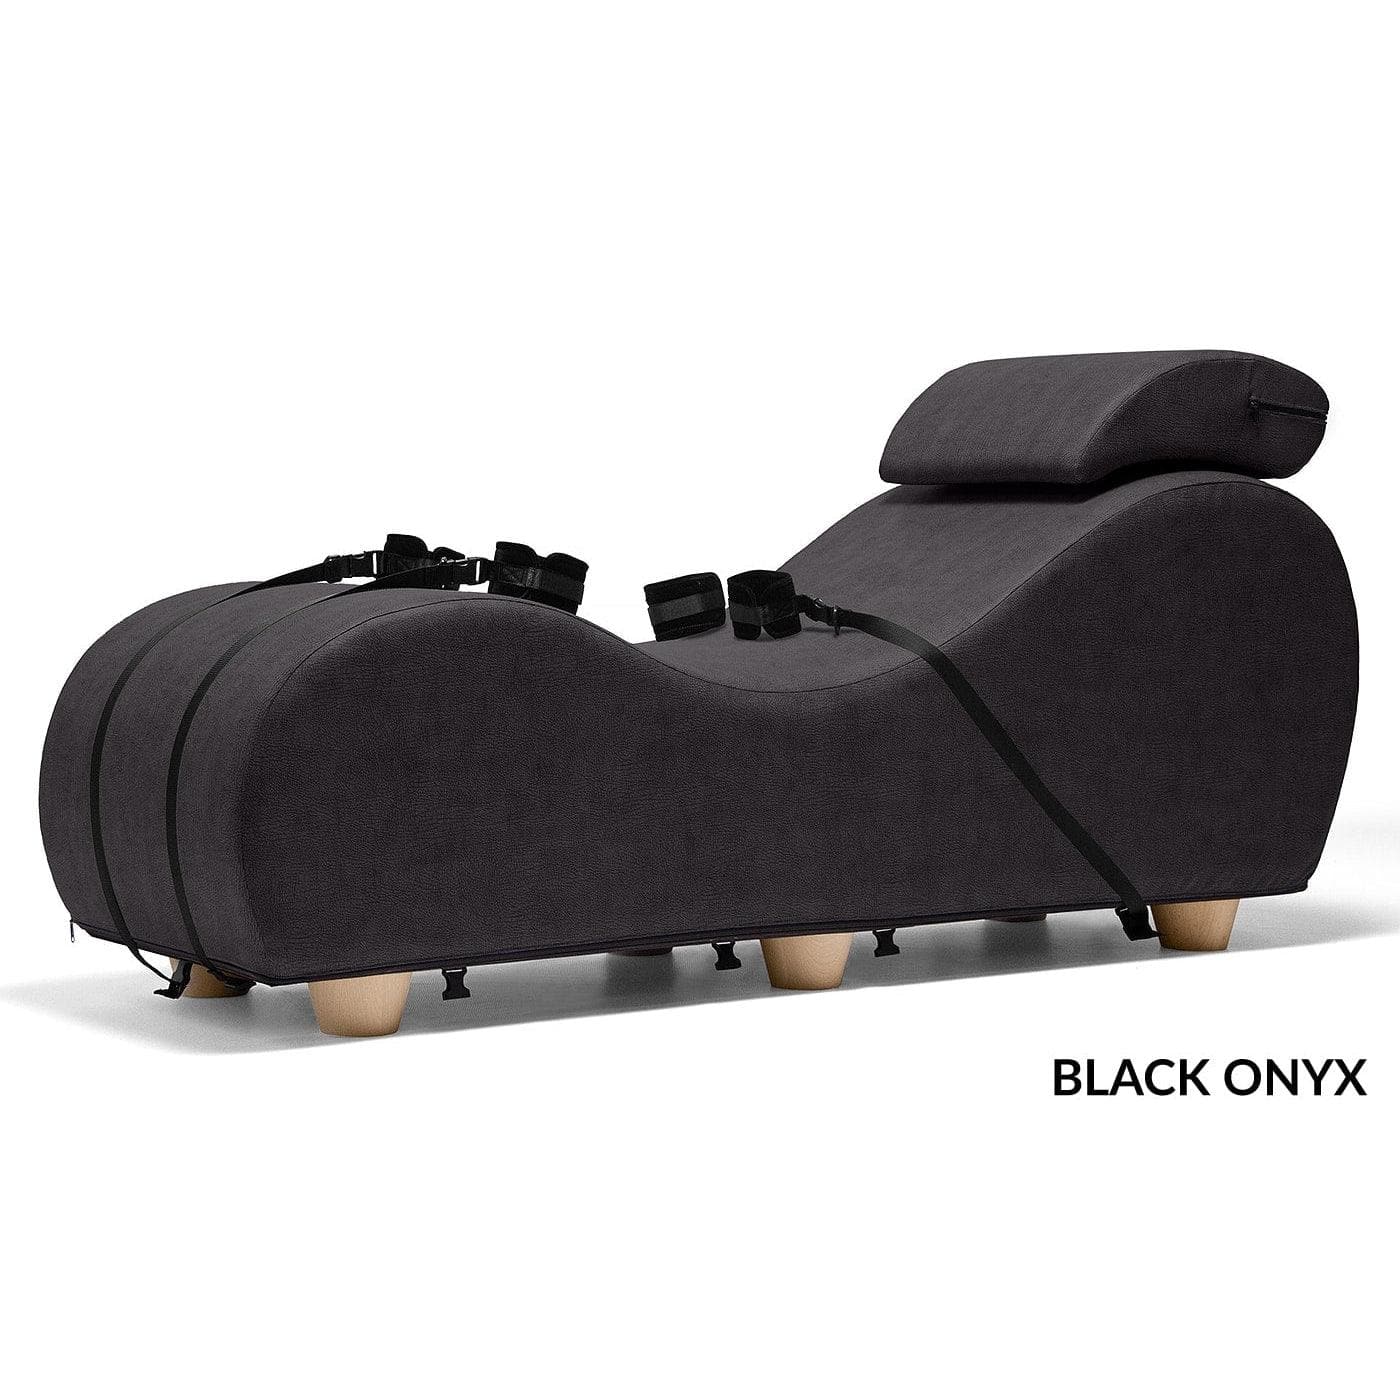 Liberator Black Label Esse Chaise II Elevated Couples Sex Position Lounger with Feet picture